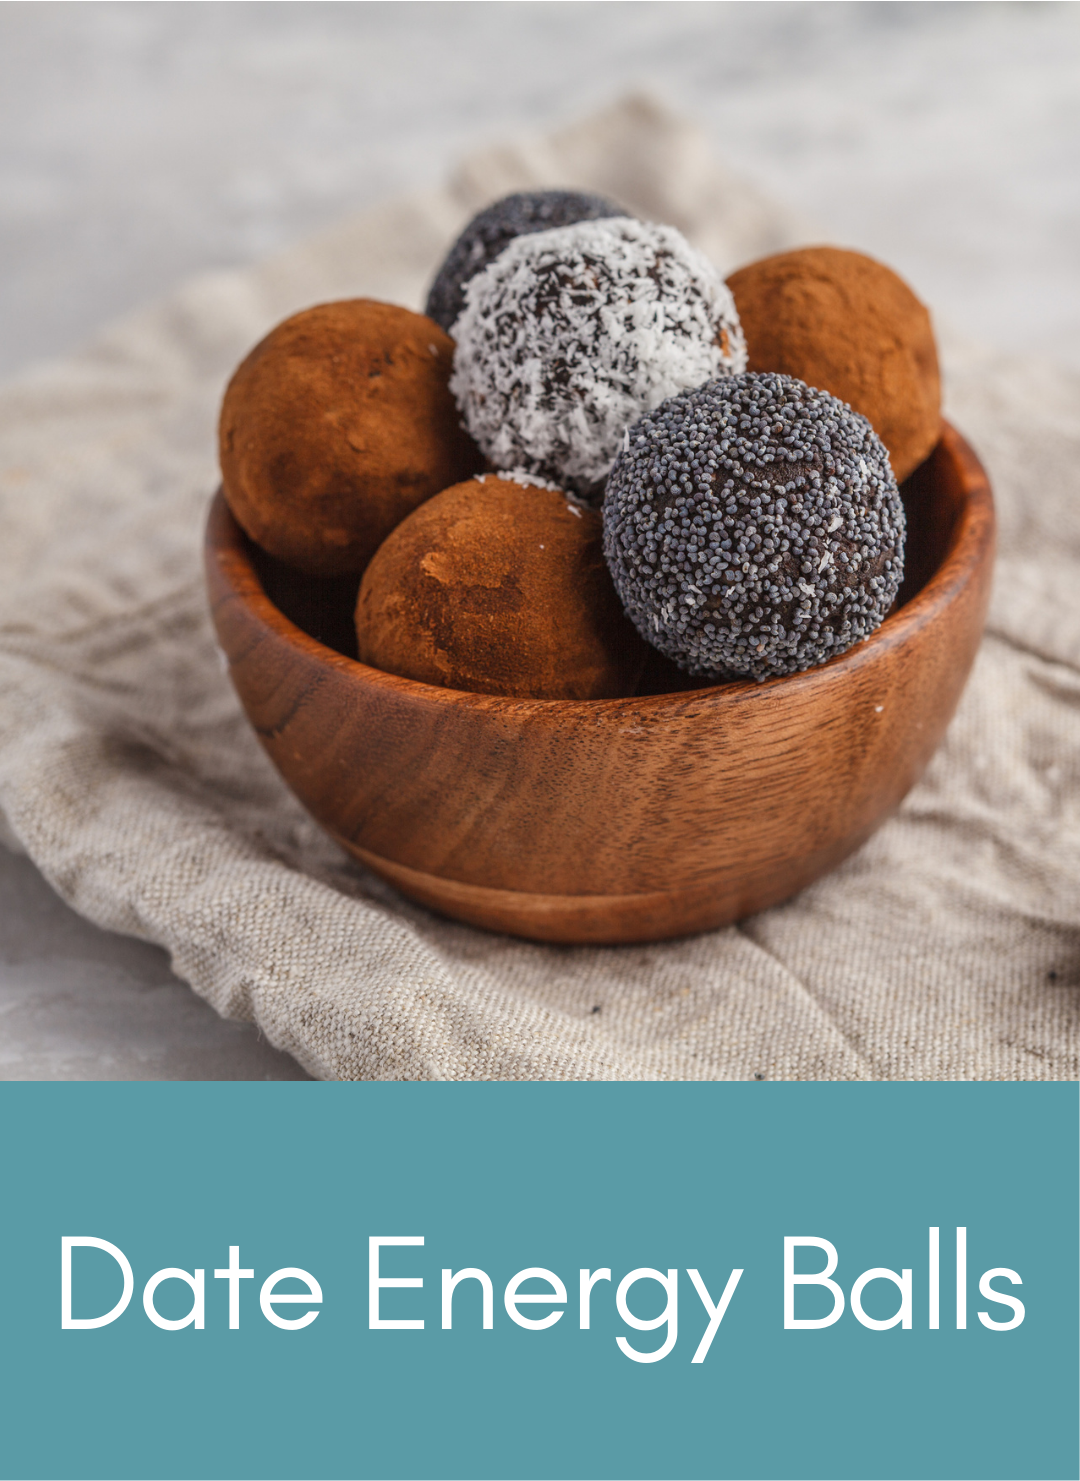 Vegan date energy balls Picture with link to recipe